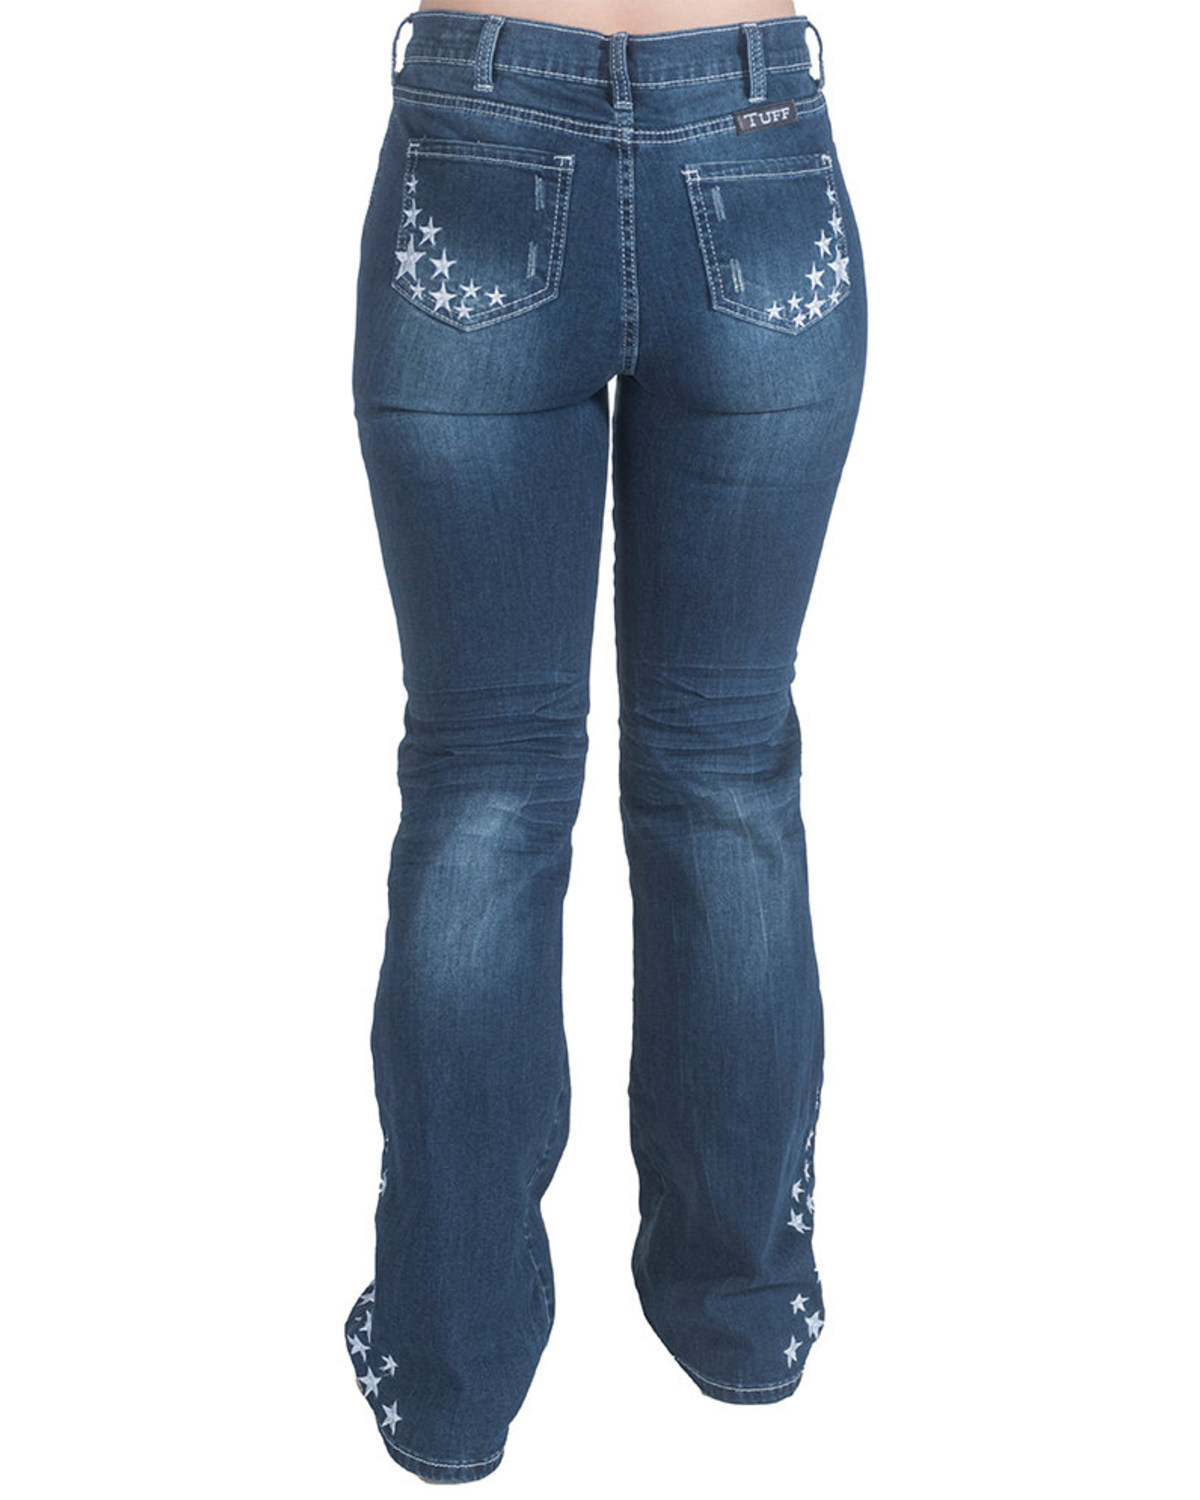 Cowgirl Tuff Girls Medium Wash Stardust Embroidered Bootcut Jeans